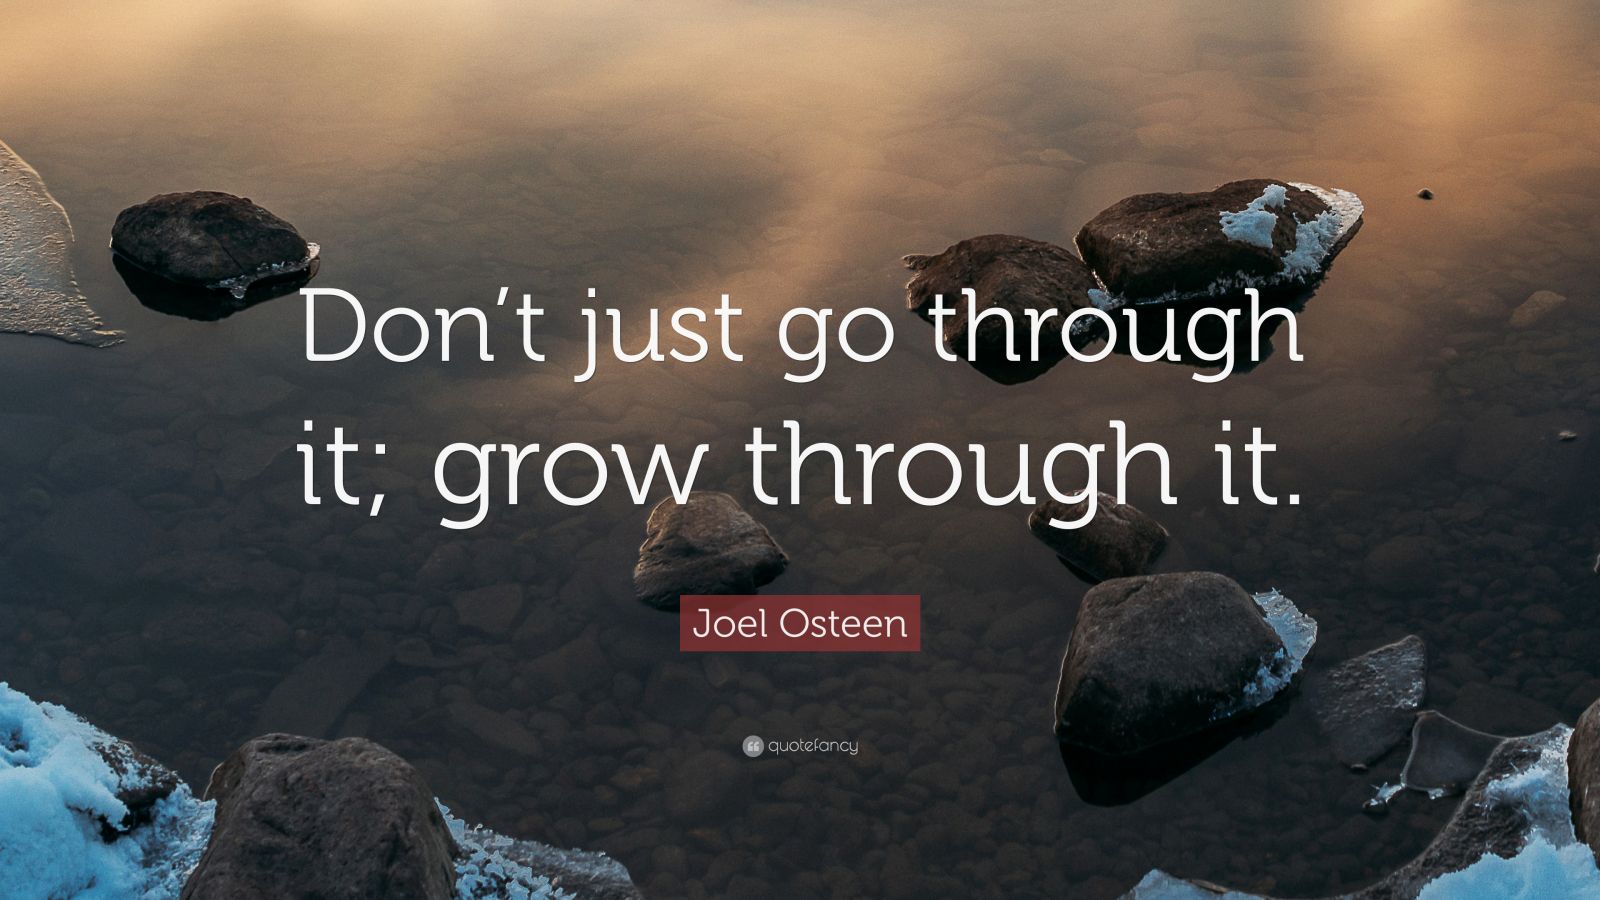 Joel Osteen Quote: “Don’t just go through it; grow through it.” (12 ...